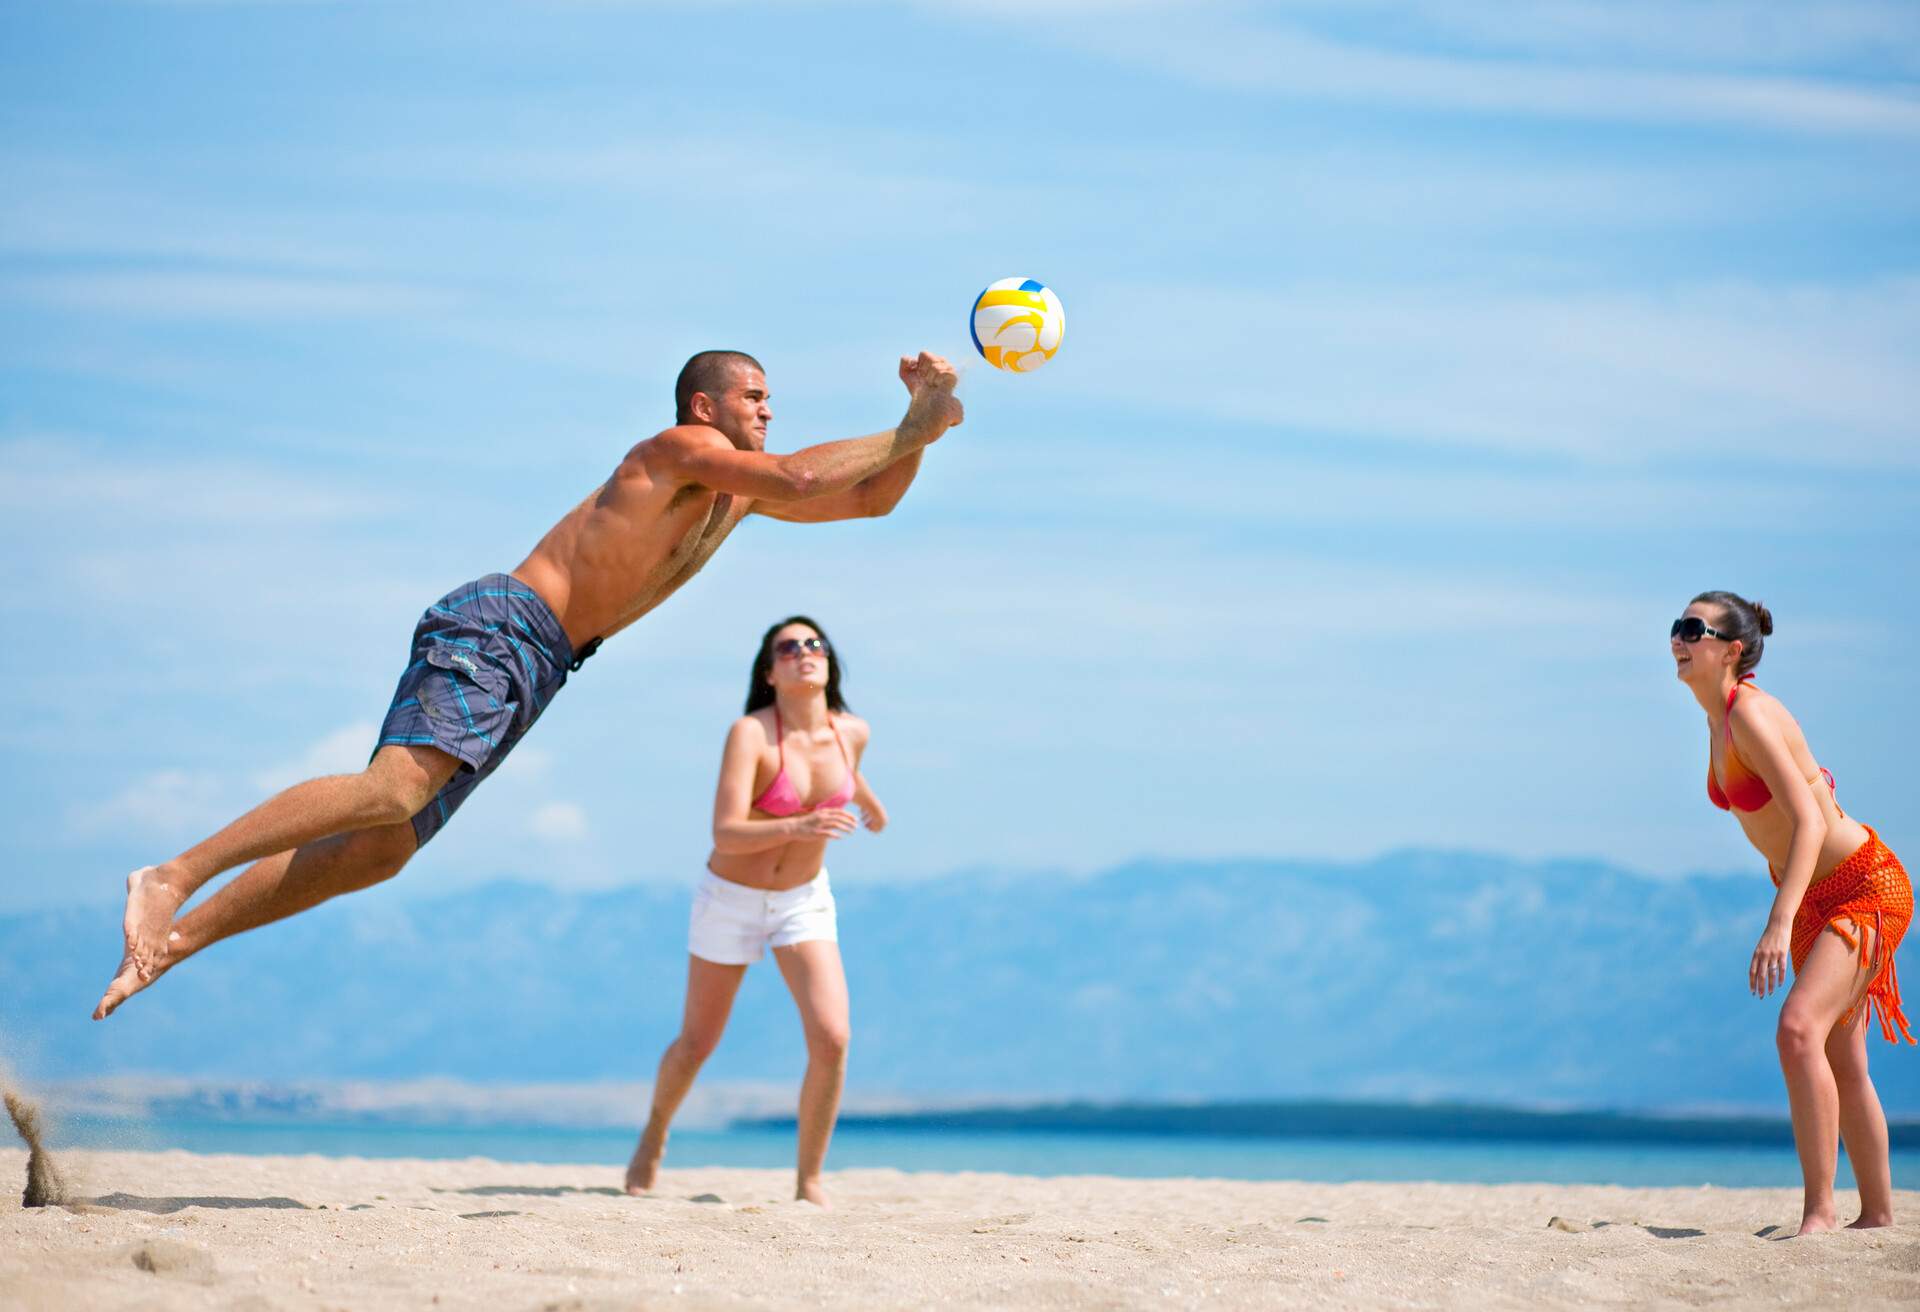 THEME_PEOPLE_BEACH_VOLLEYBALL-GettyImages-108356117